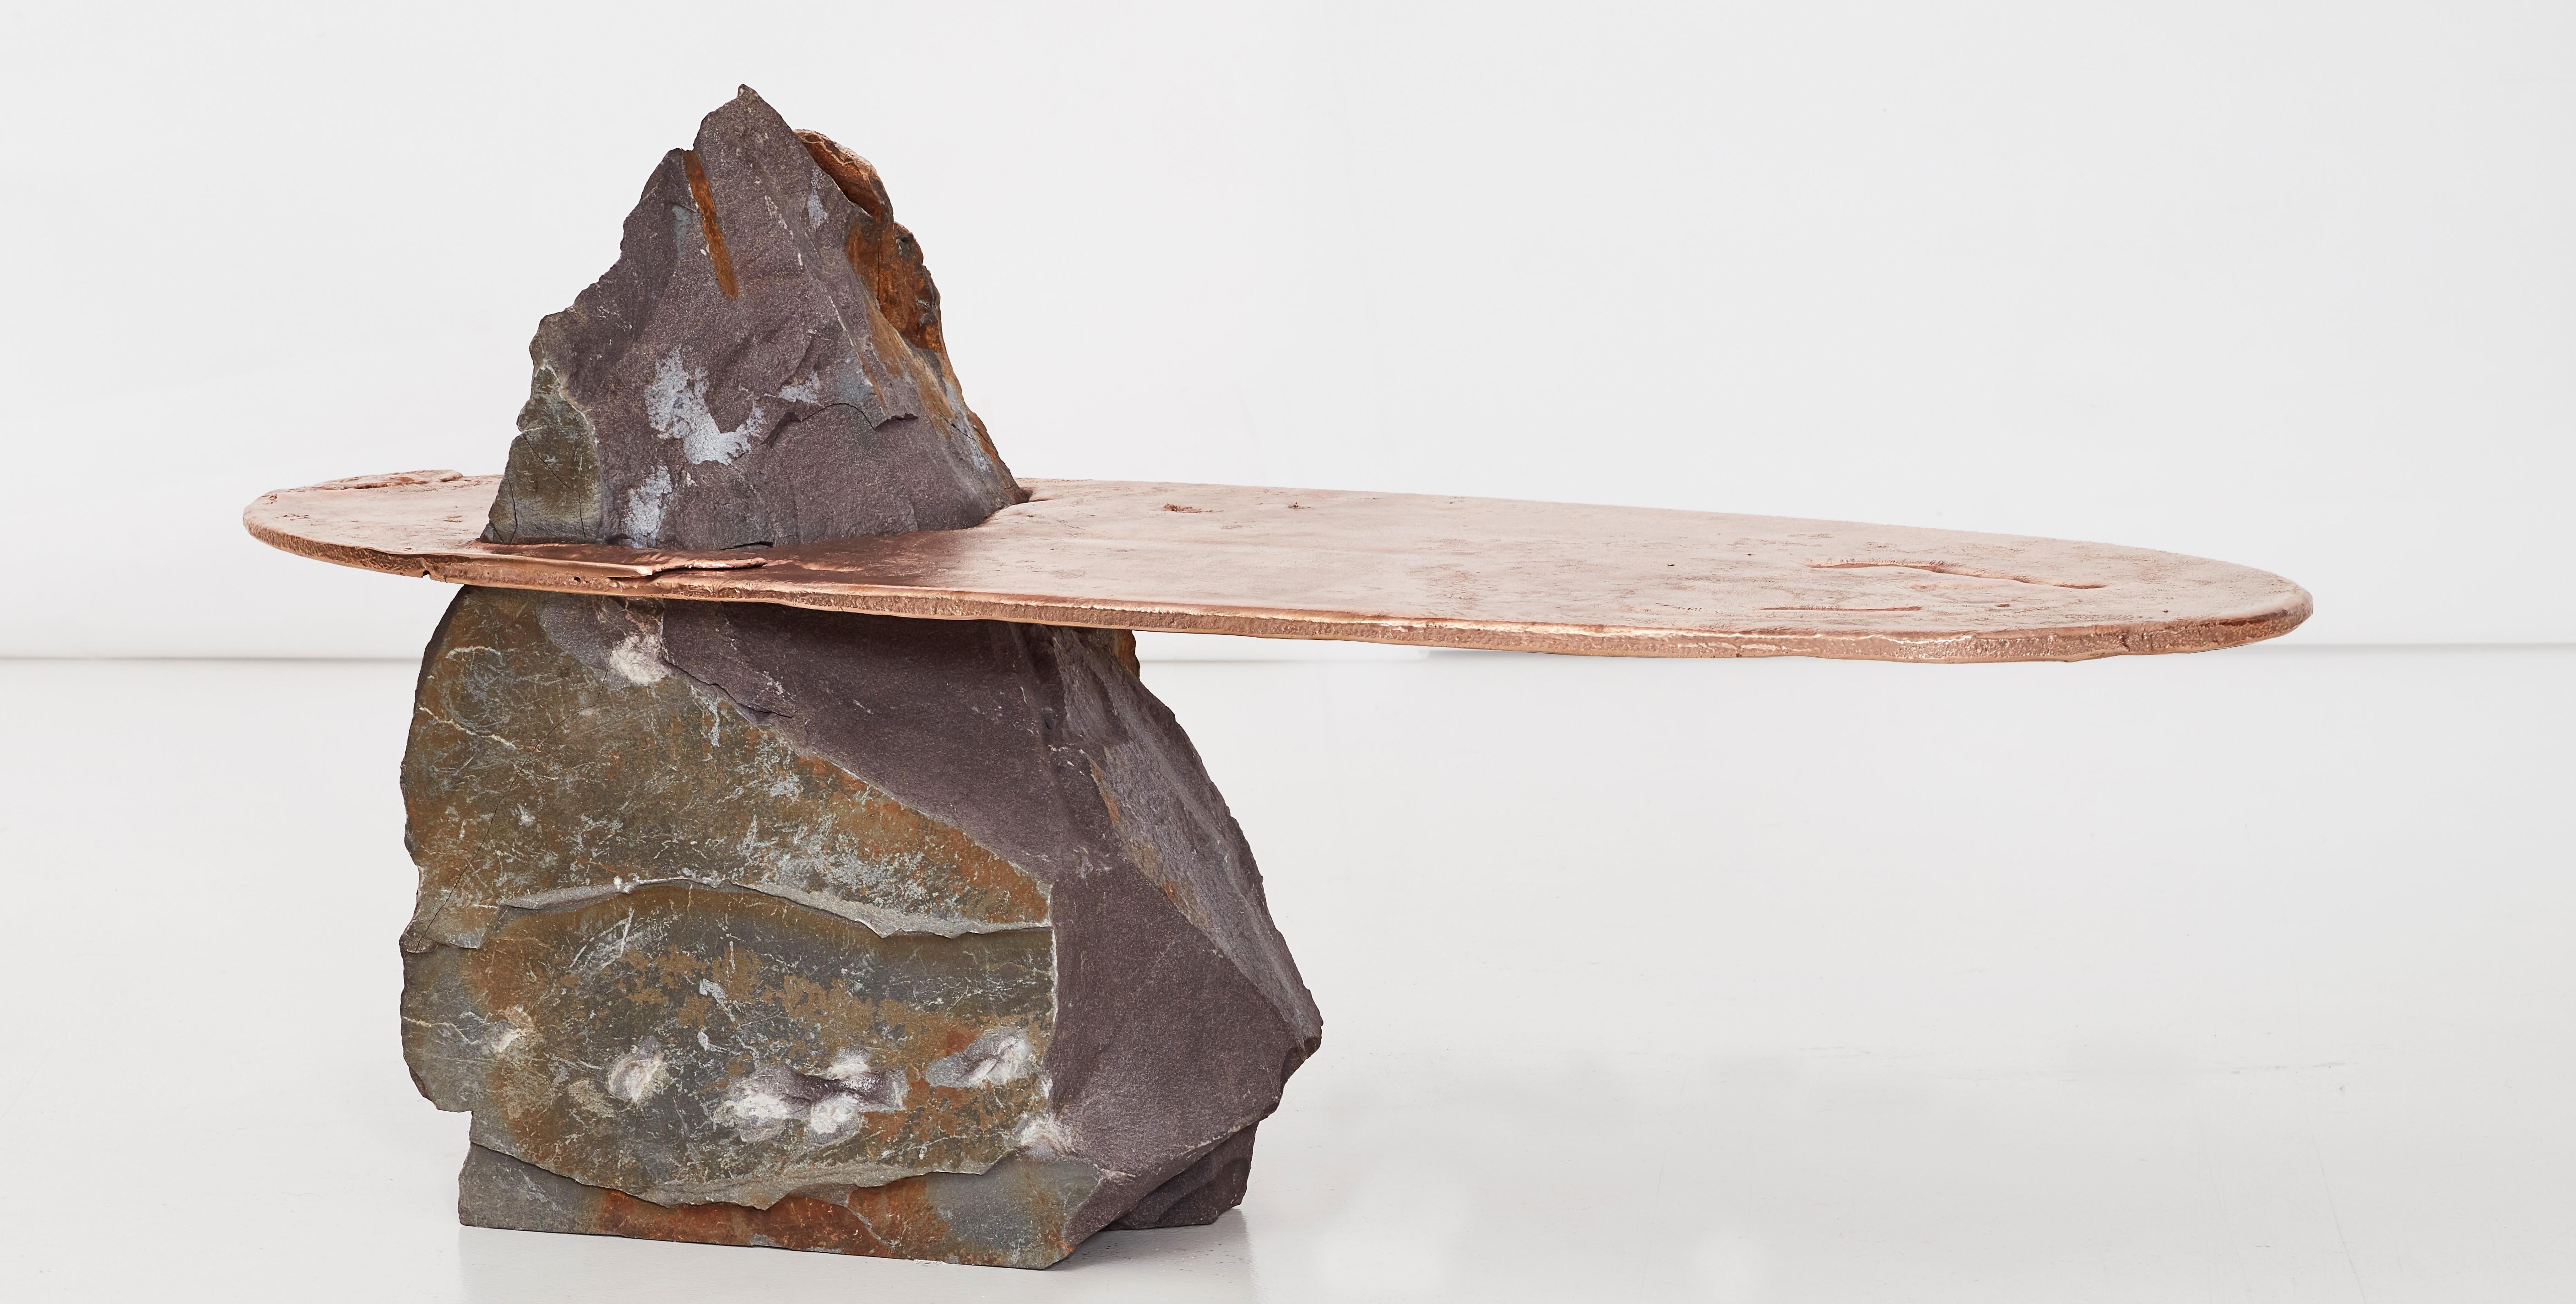 Born in Cape Town in 1985, Jesse Ede is a self-taught designer who favours a materials and process-driven approach to furniture design. Working primarily in aluminium, stone, bronze and brass, he looks to celebrate the rawness of uncontrollable